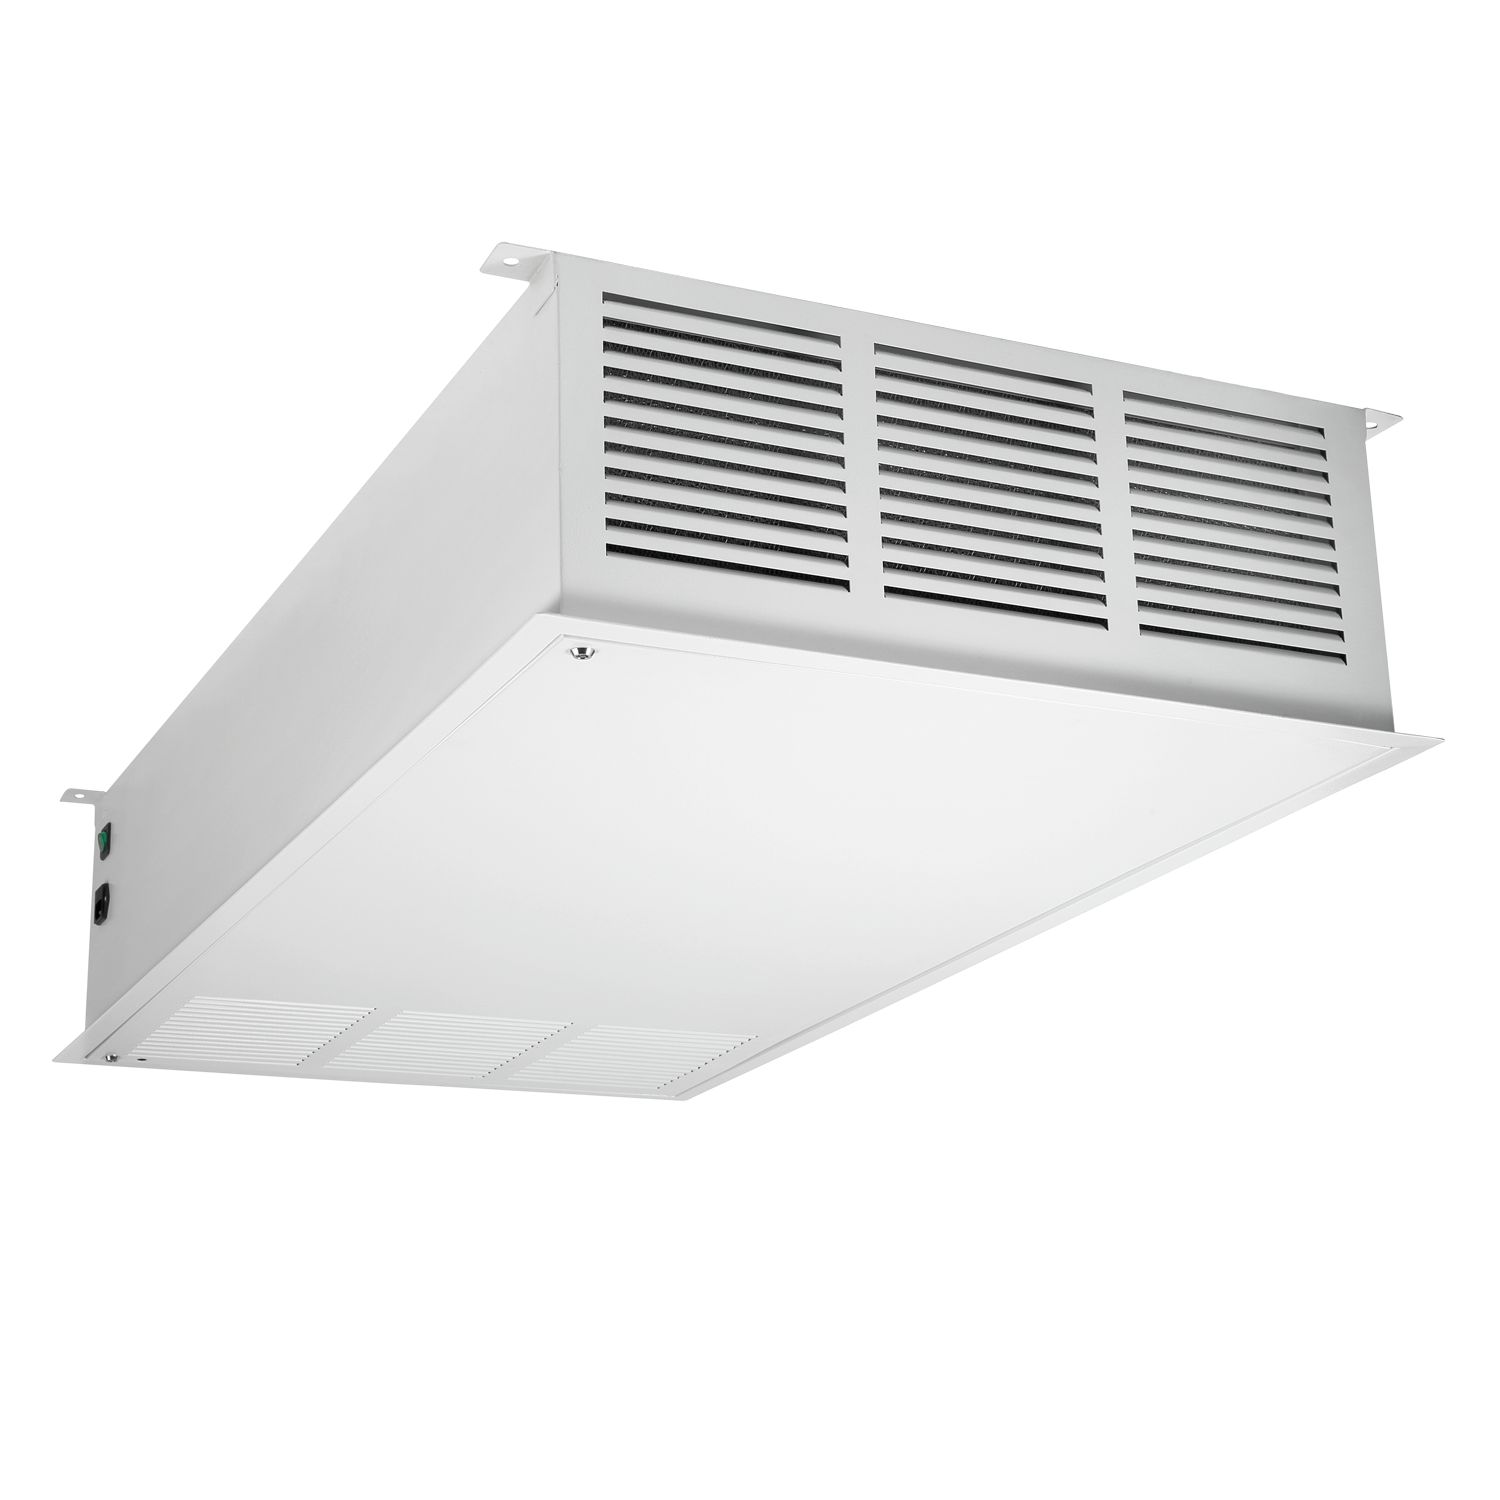 PS-501T4 Ceiling Mounted Bipolar Ionization Air Purifier 